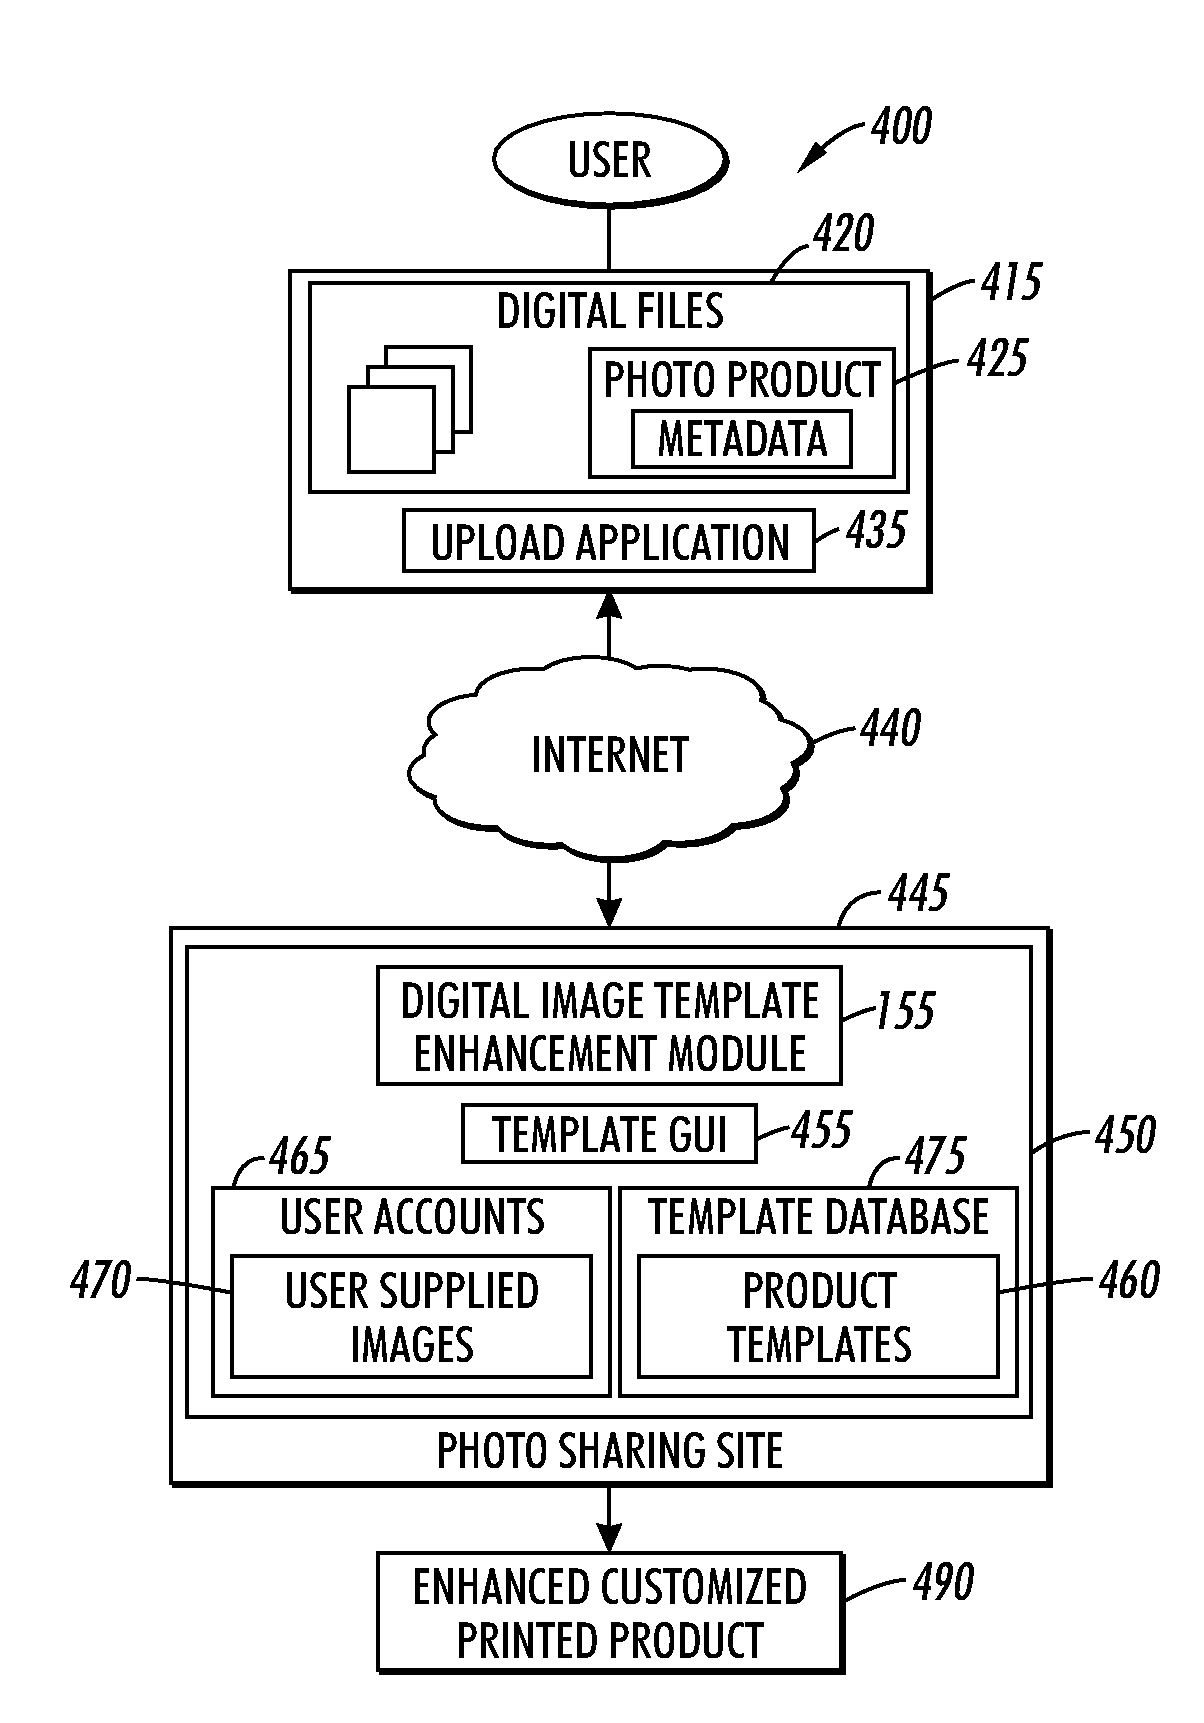 Method and system for processing photo product templates